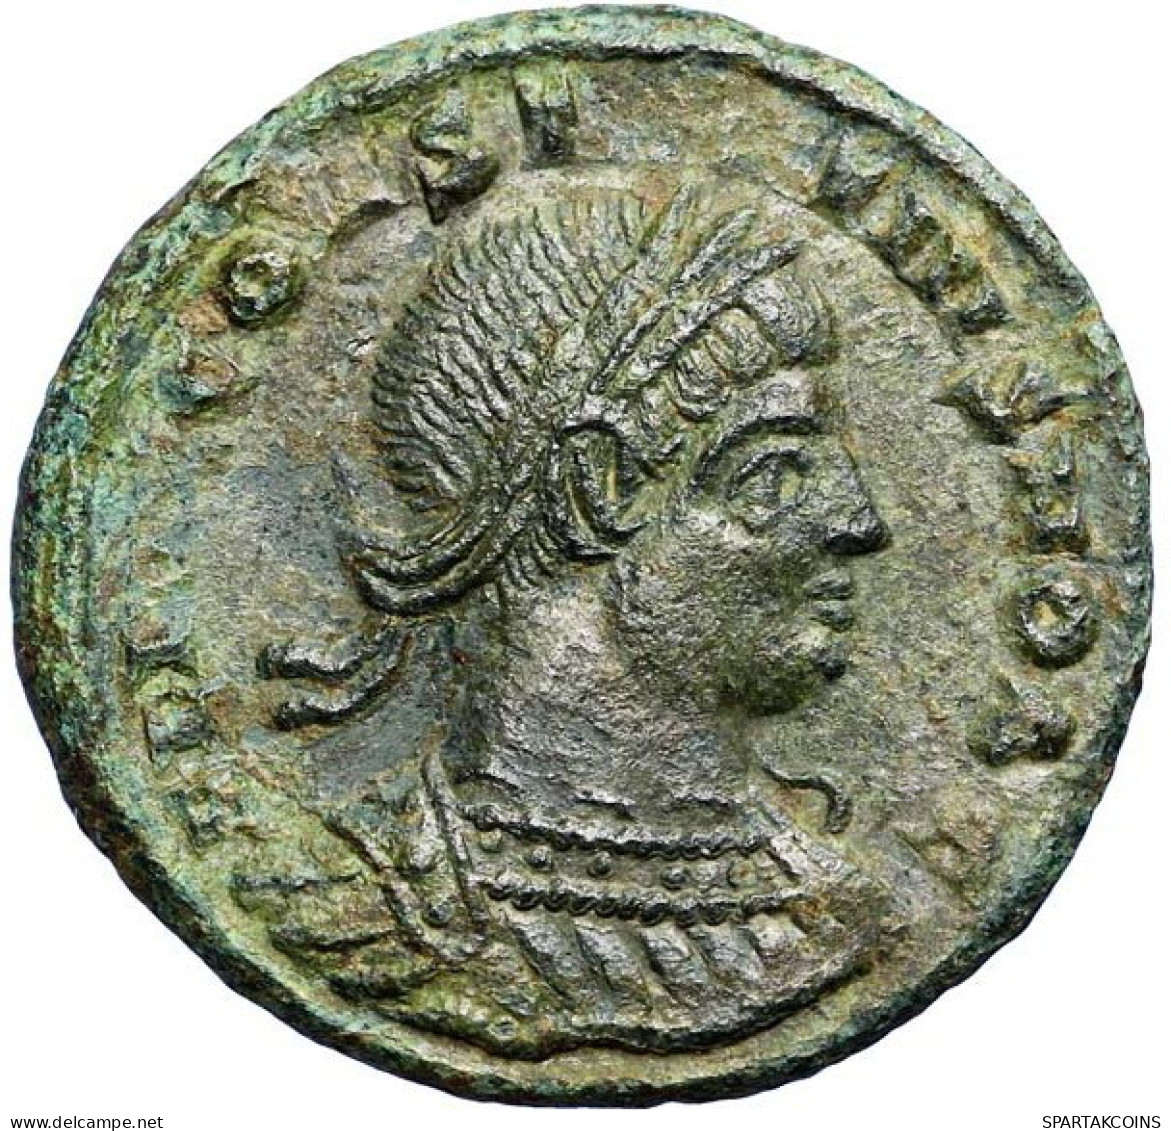 CONSTANTINE II Antioche Offic.: 9e AD330 Rarity: R1 2.82g/18.5mm #ANC10018.48.D.A - The Christian Empire (307 AD Tot 363 AD)